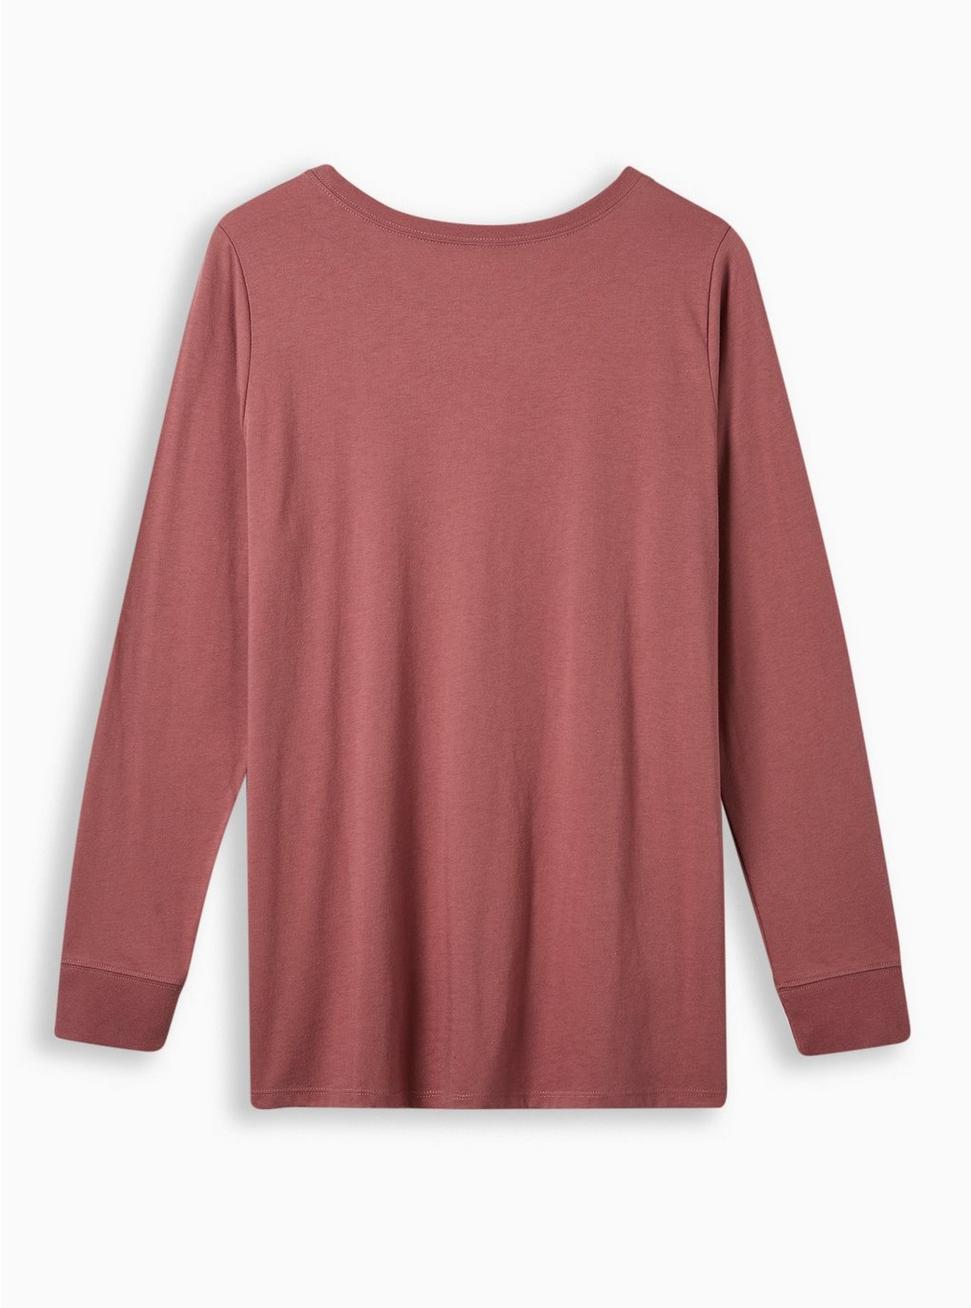 My Entire Life Classic Fit Signature Jersey Crew Neck Long Sleeve Tee, WILD GINGER BURGUNDY, alternate